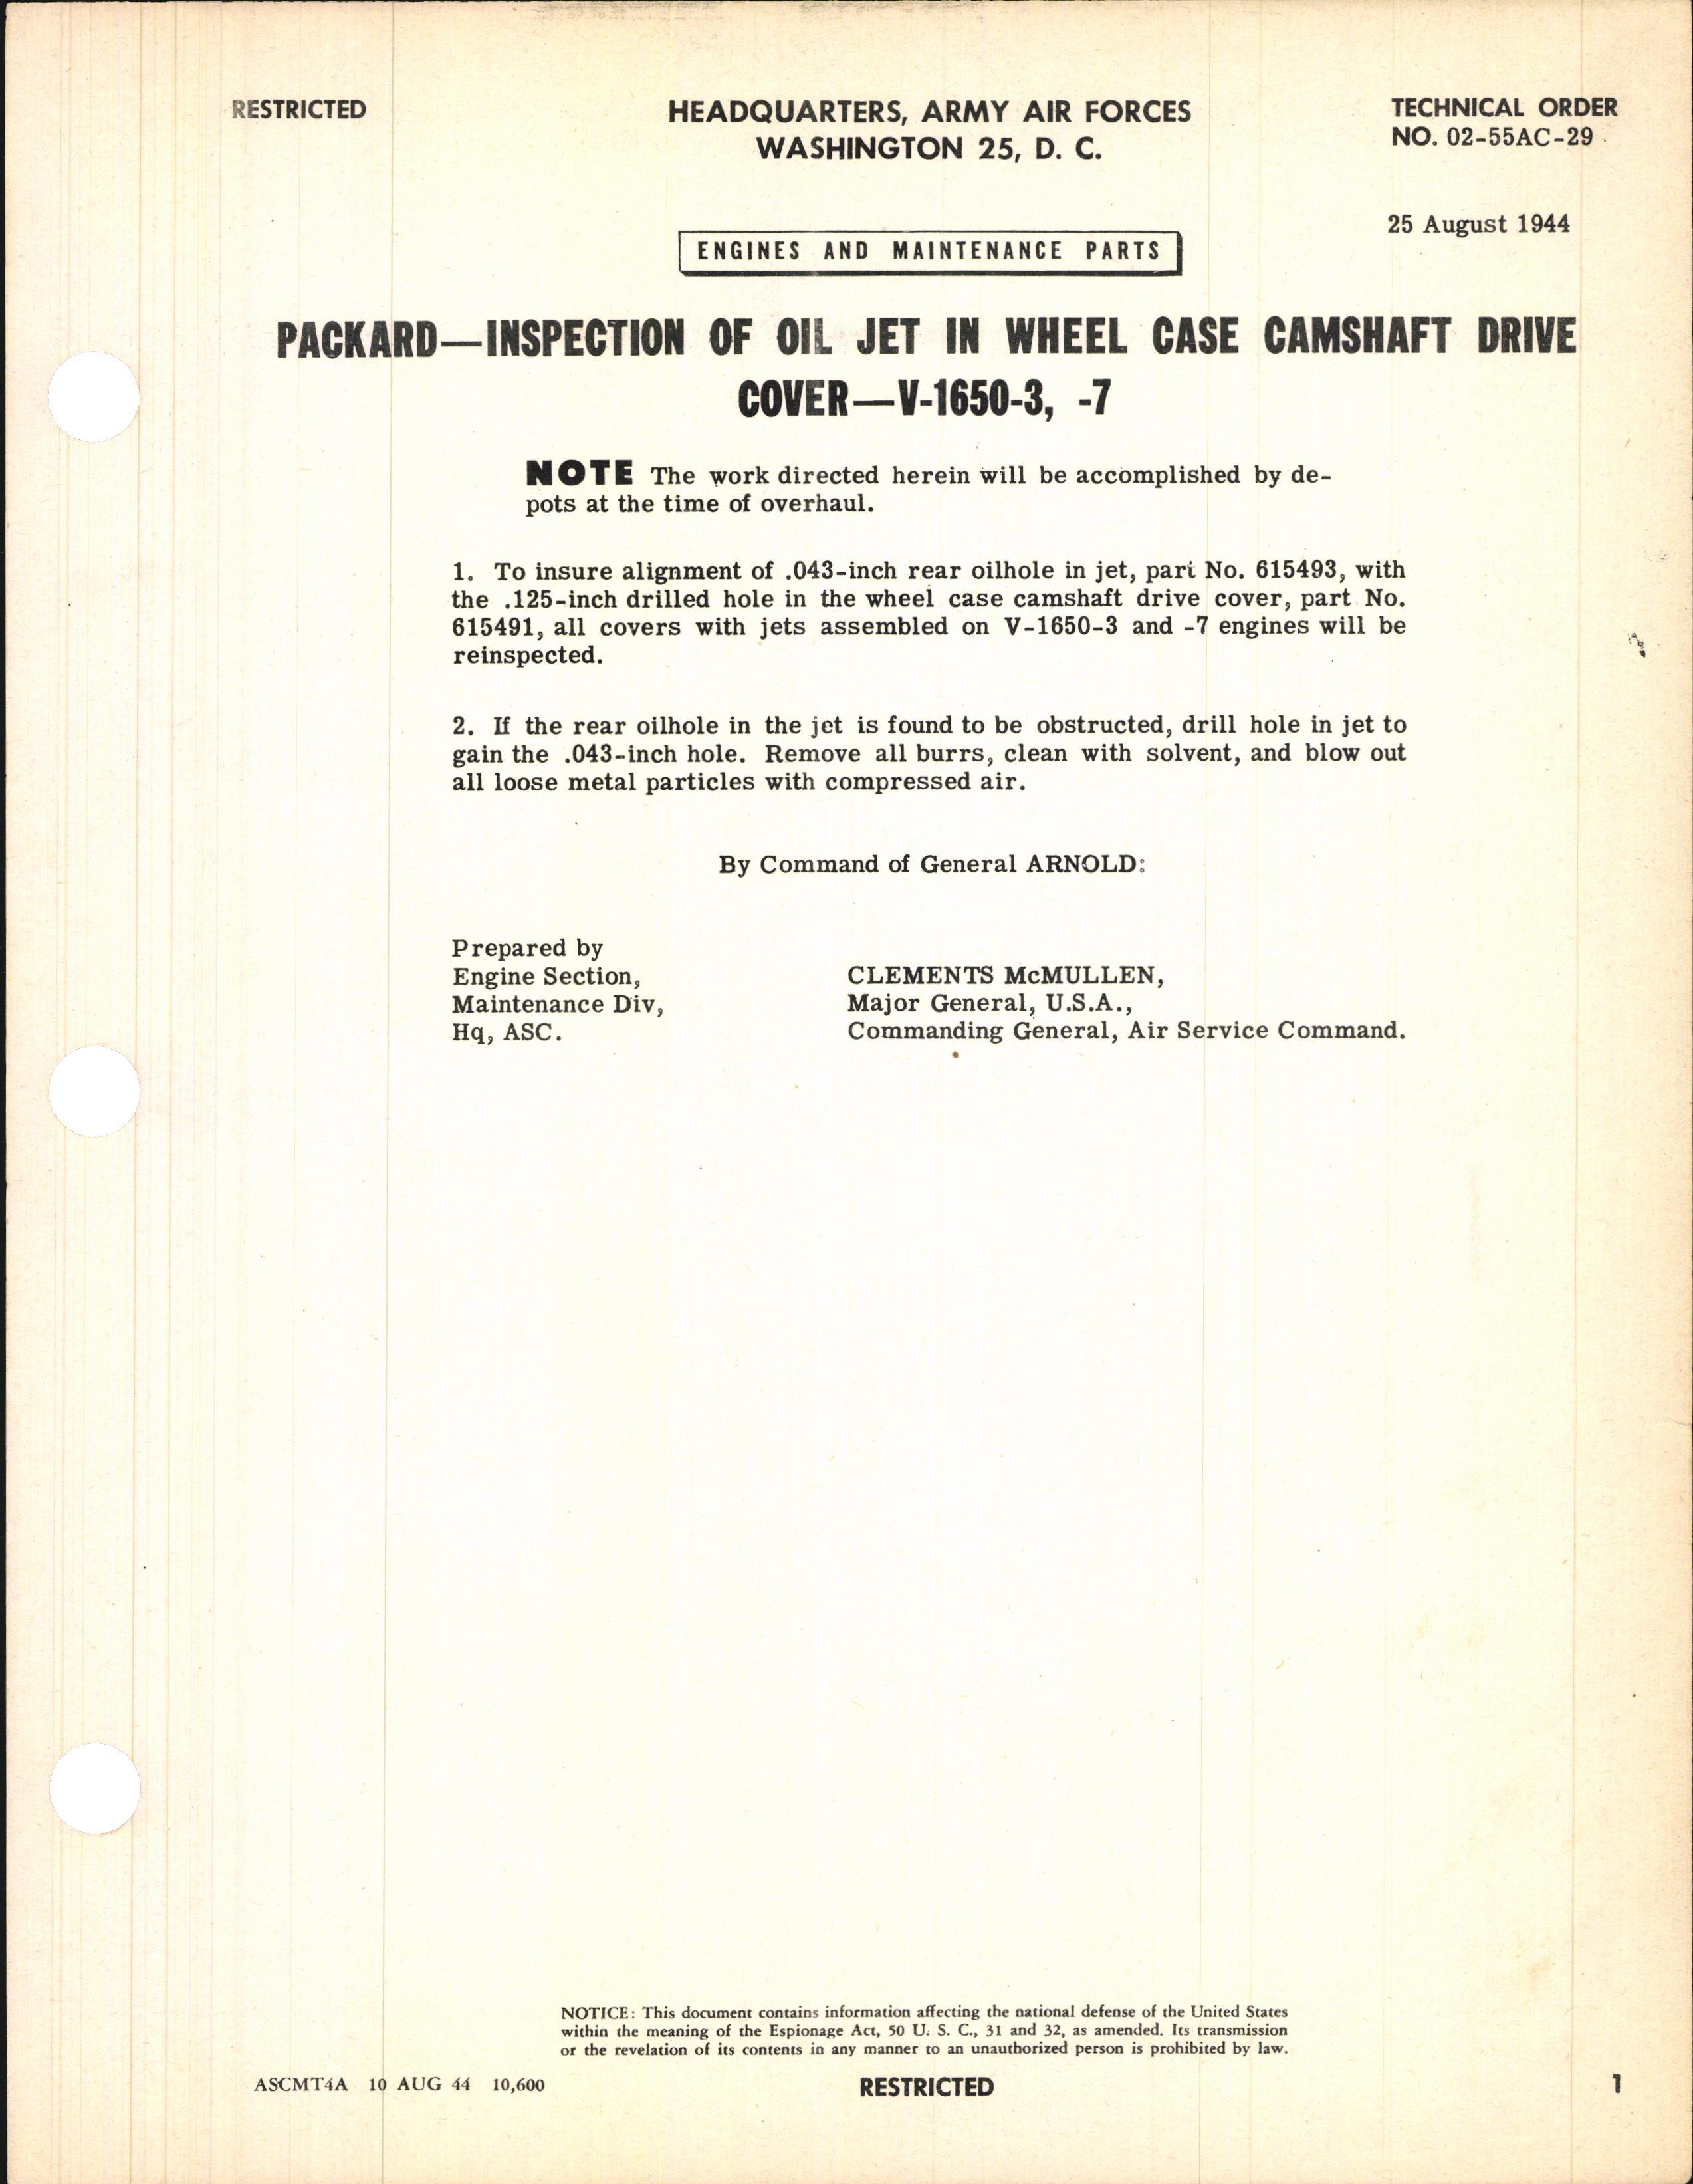 Sample page 1 from AirCorps Library document: Inspection of Oil Jet in Wheel Case Camshaft Drive Cover for V-1650-3 and -7